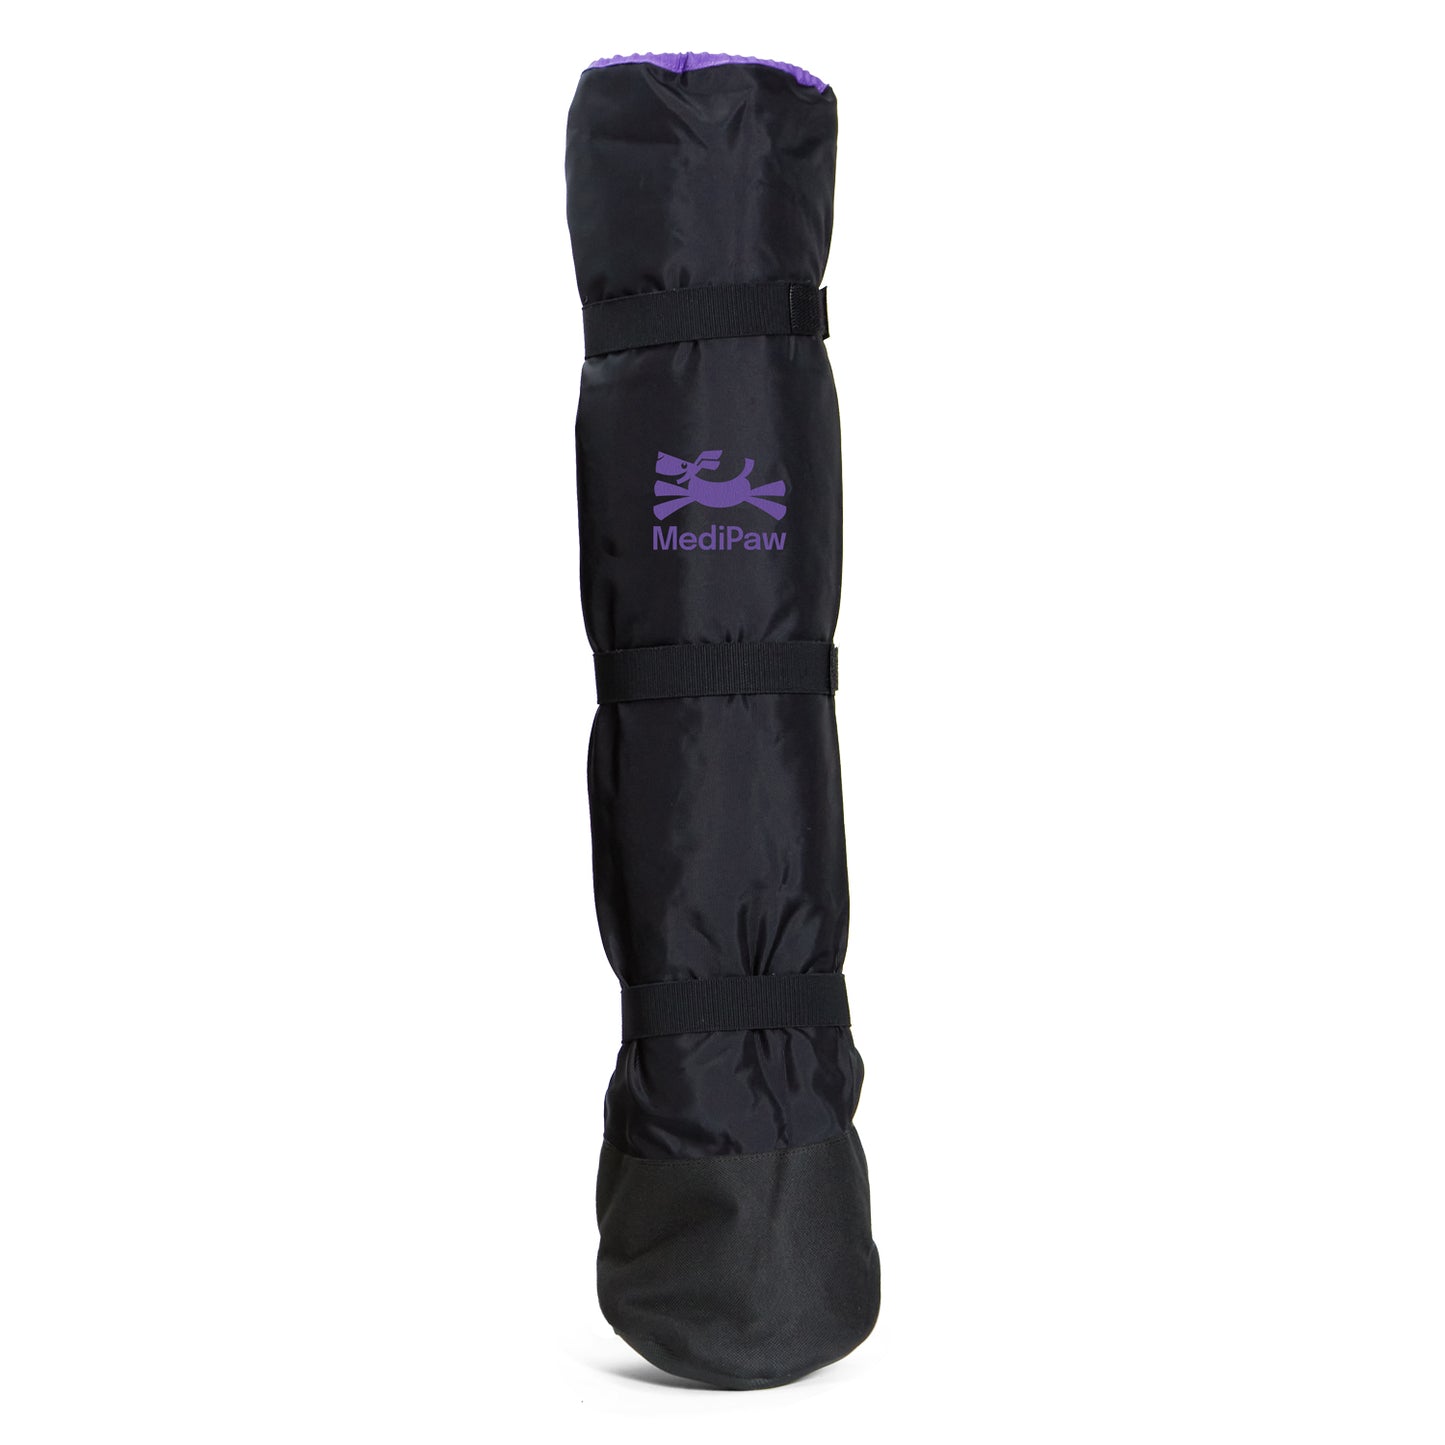 A black and purple Your Whole Dog MediPaw: Soft Bandage (Basic) Boot on a white background.